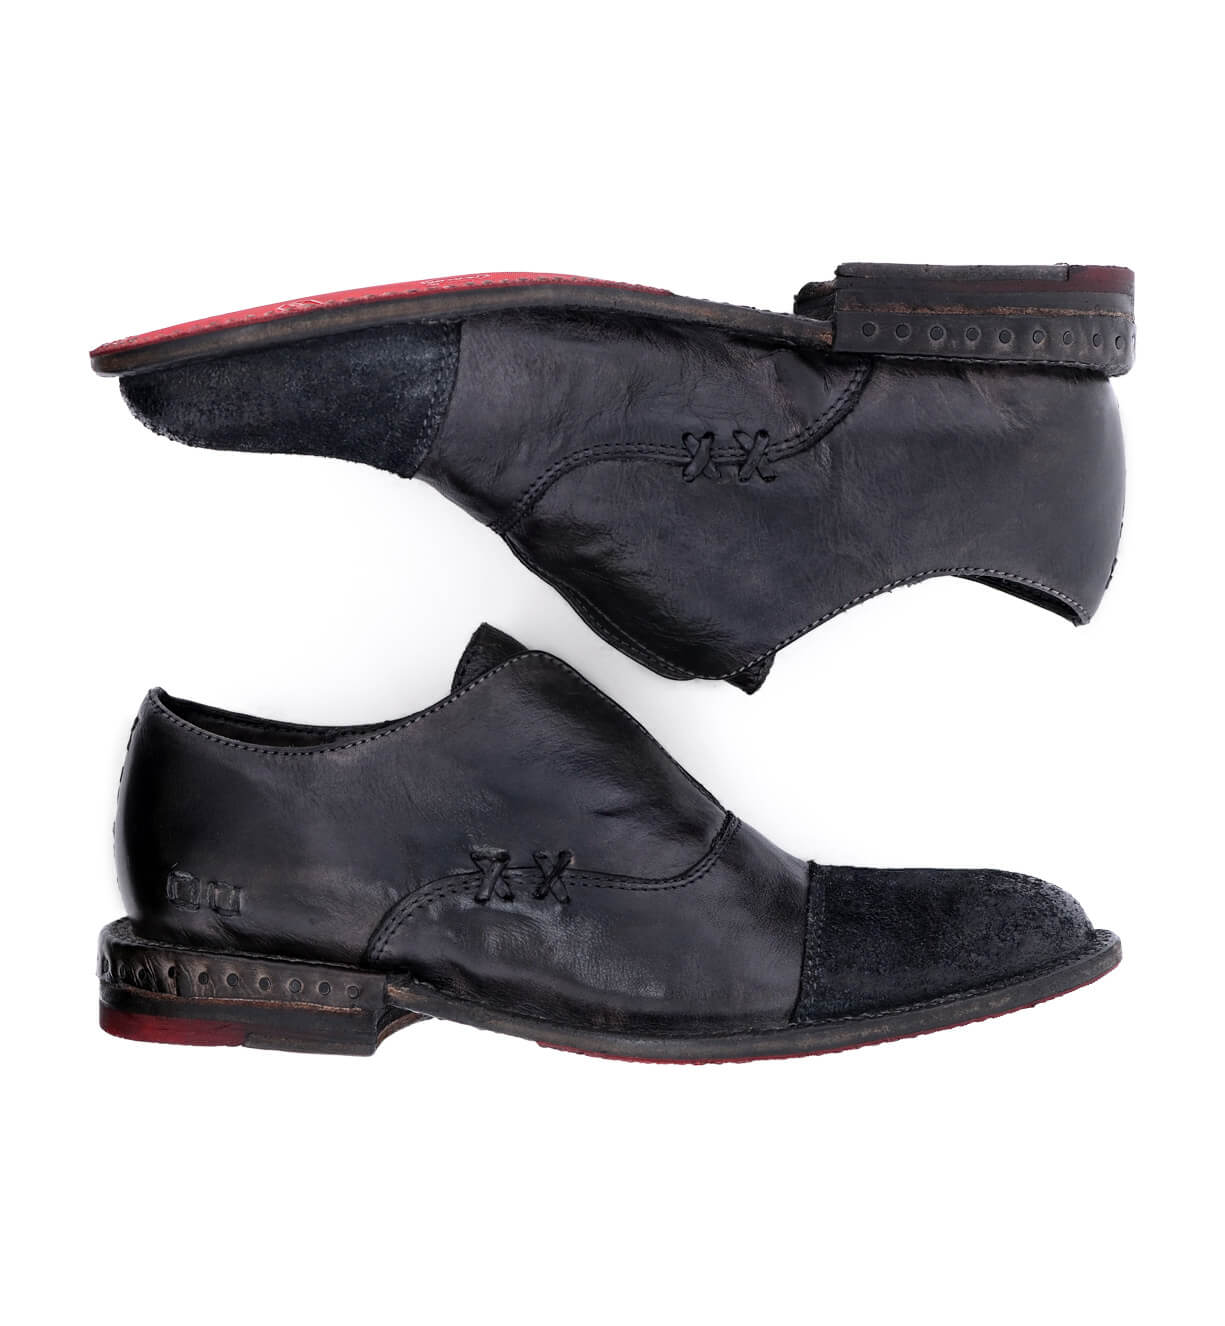 A pair of Rose black leather shoes with red soles by Bed Stu.